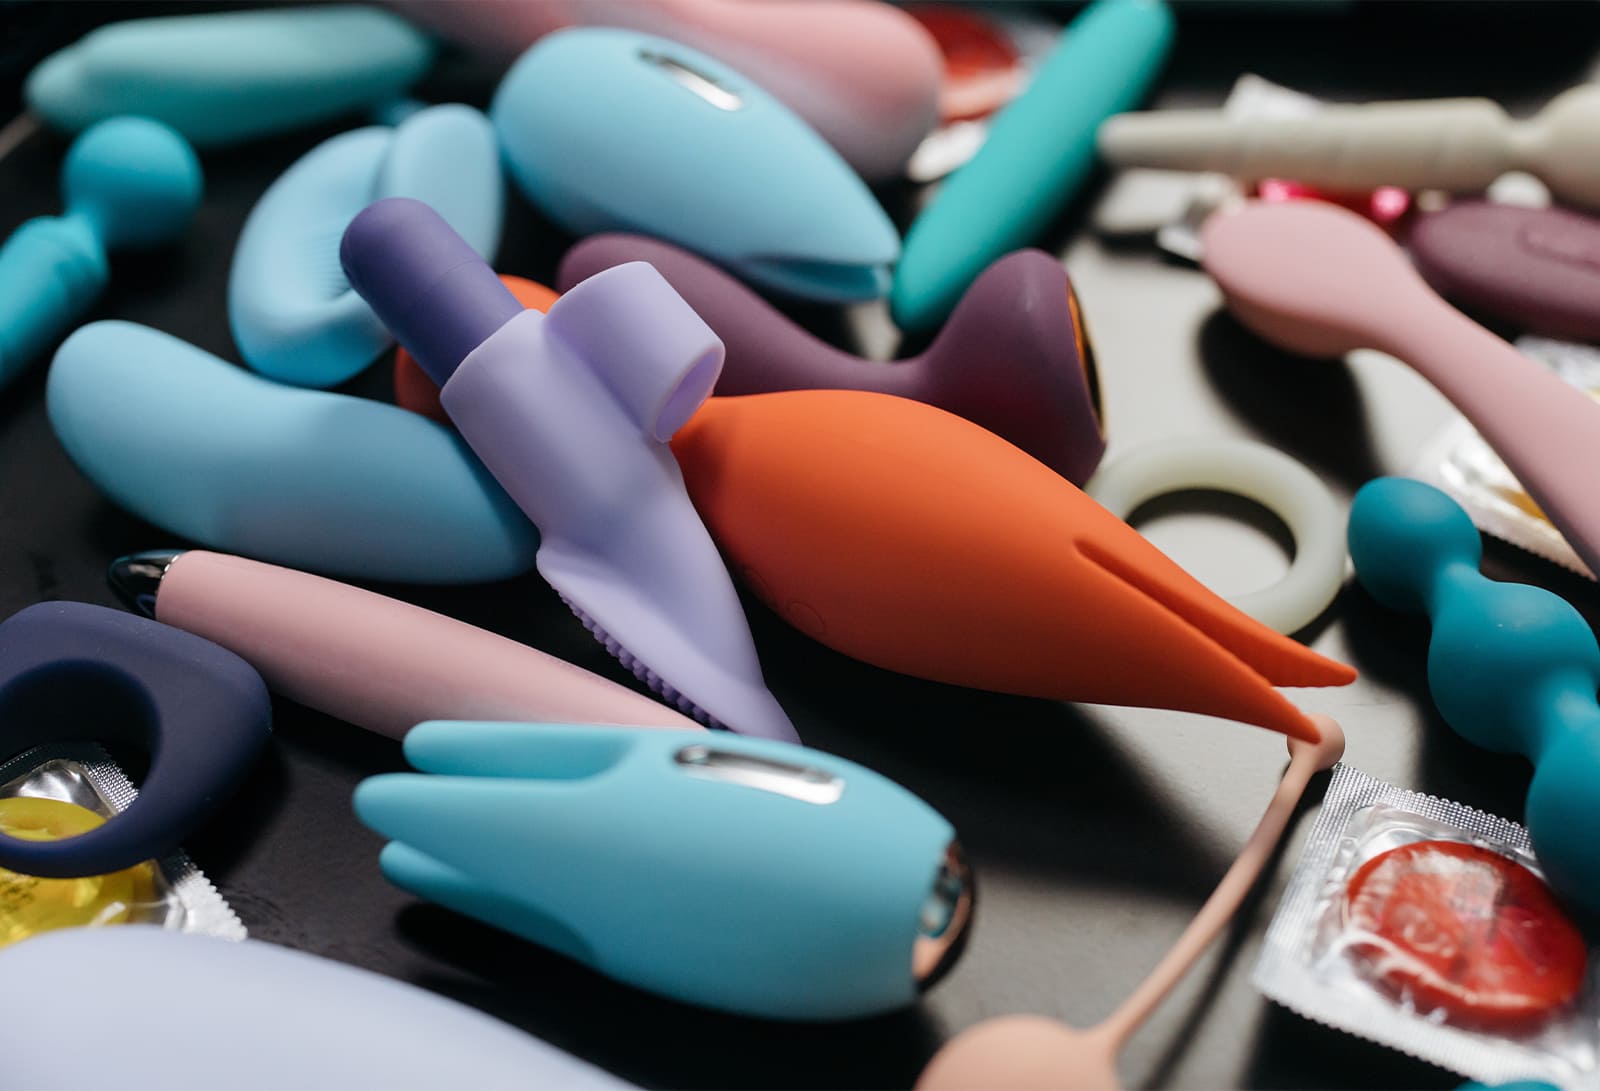 Ohhcean sex toys are made from recycled ocean plastic